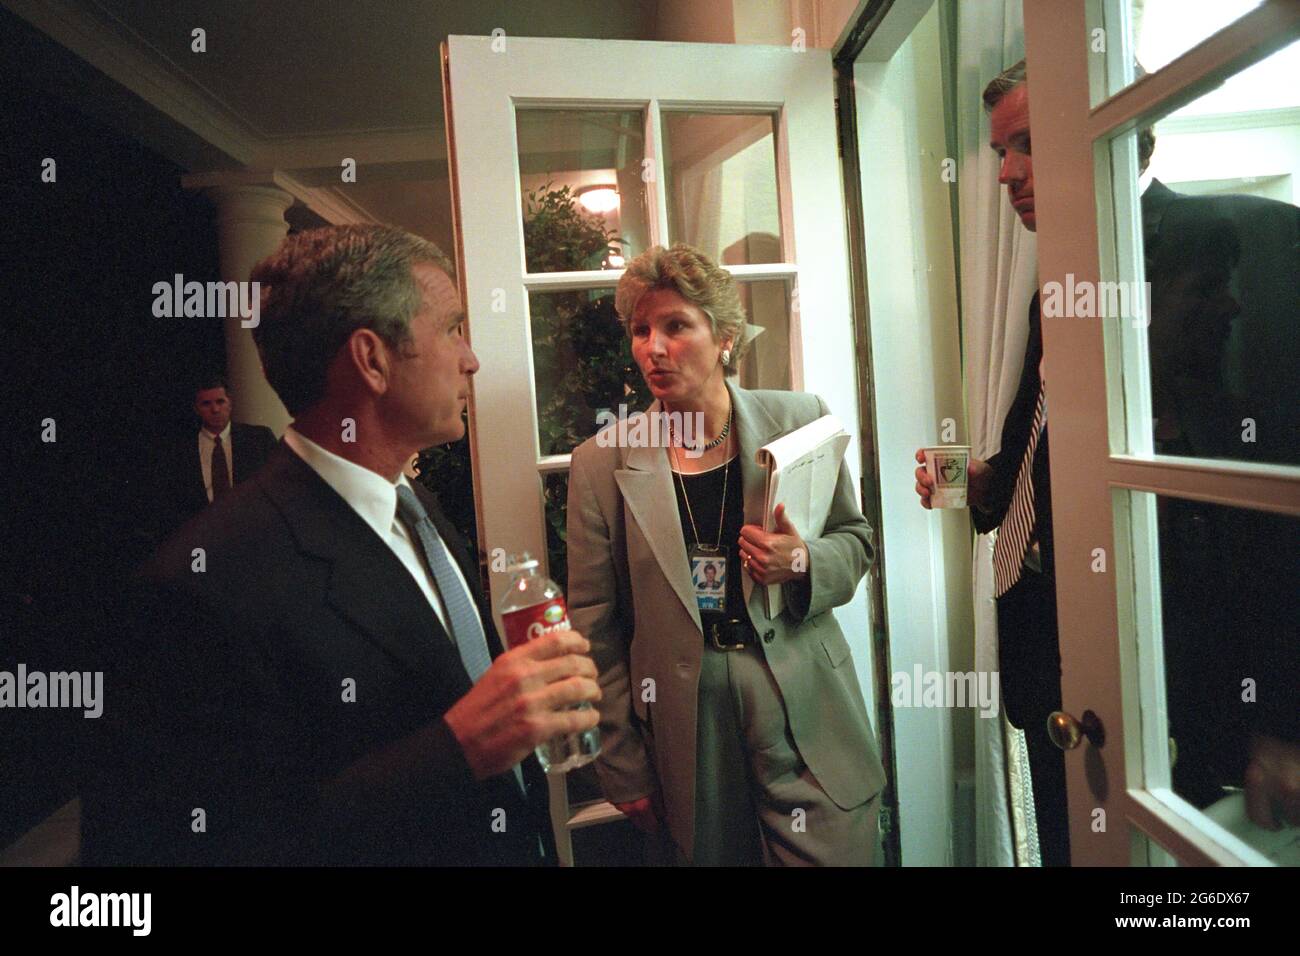 President George W. Bush confers with Karen Hughes and Dan Bartlett the evening of Tuesday, Sept. 11, 2001, outside the Oval Office.  Photo by Eric Draper, Courtesy of the George W. Bush Presidential Library Stock Photo